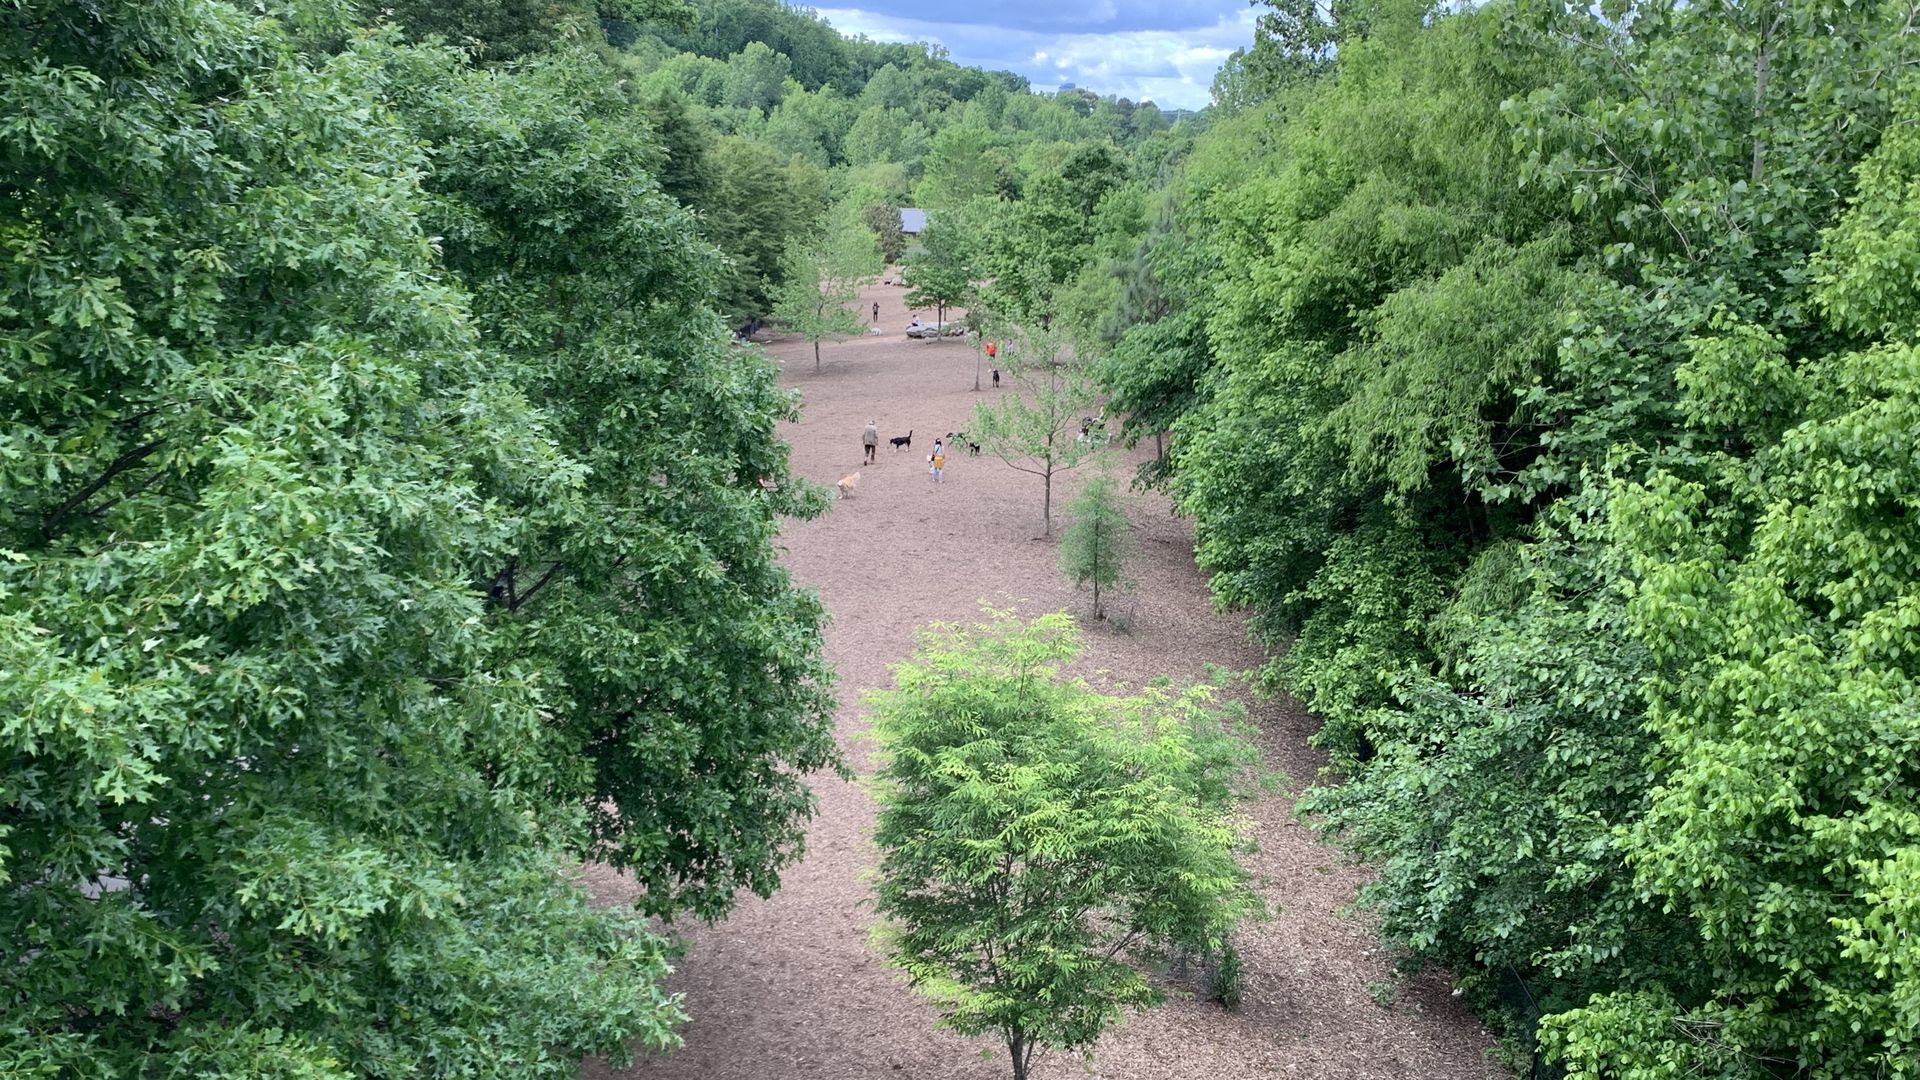 Dog park and trees